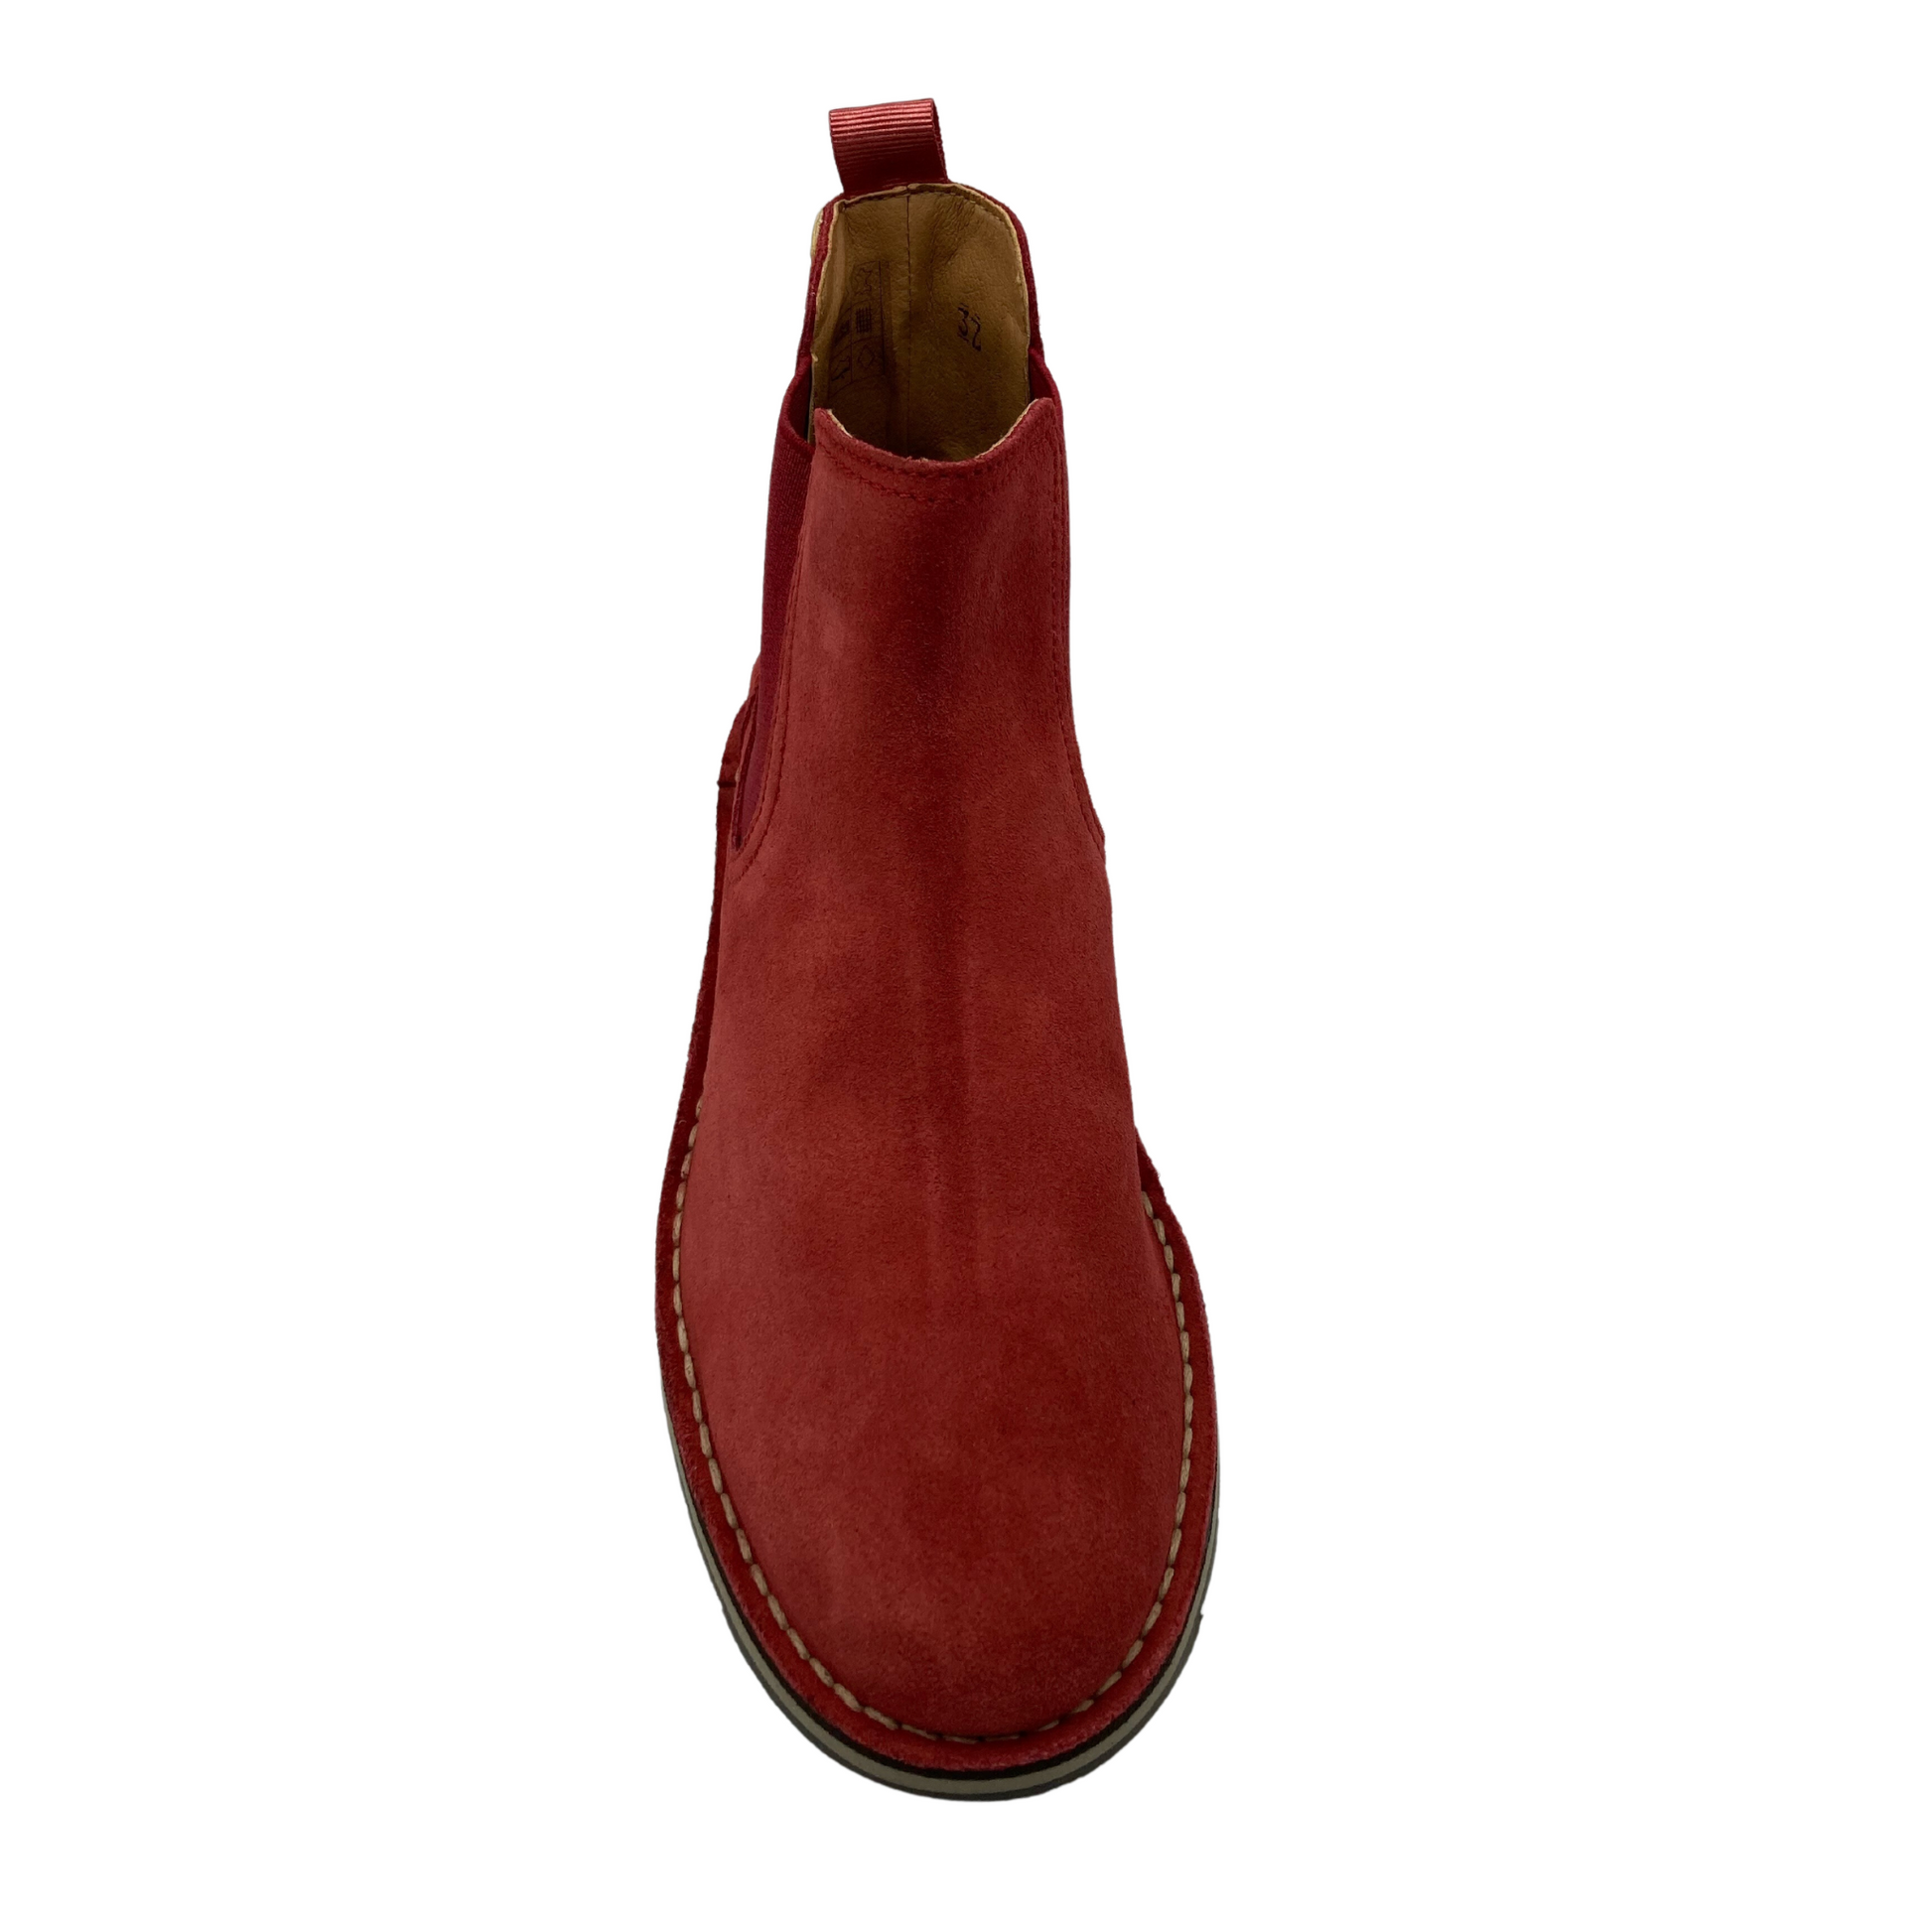 Top view of short red boot with rounded toe and cream coloured stitching around foot